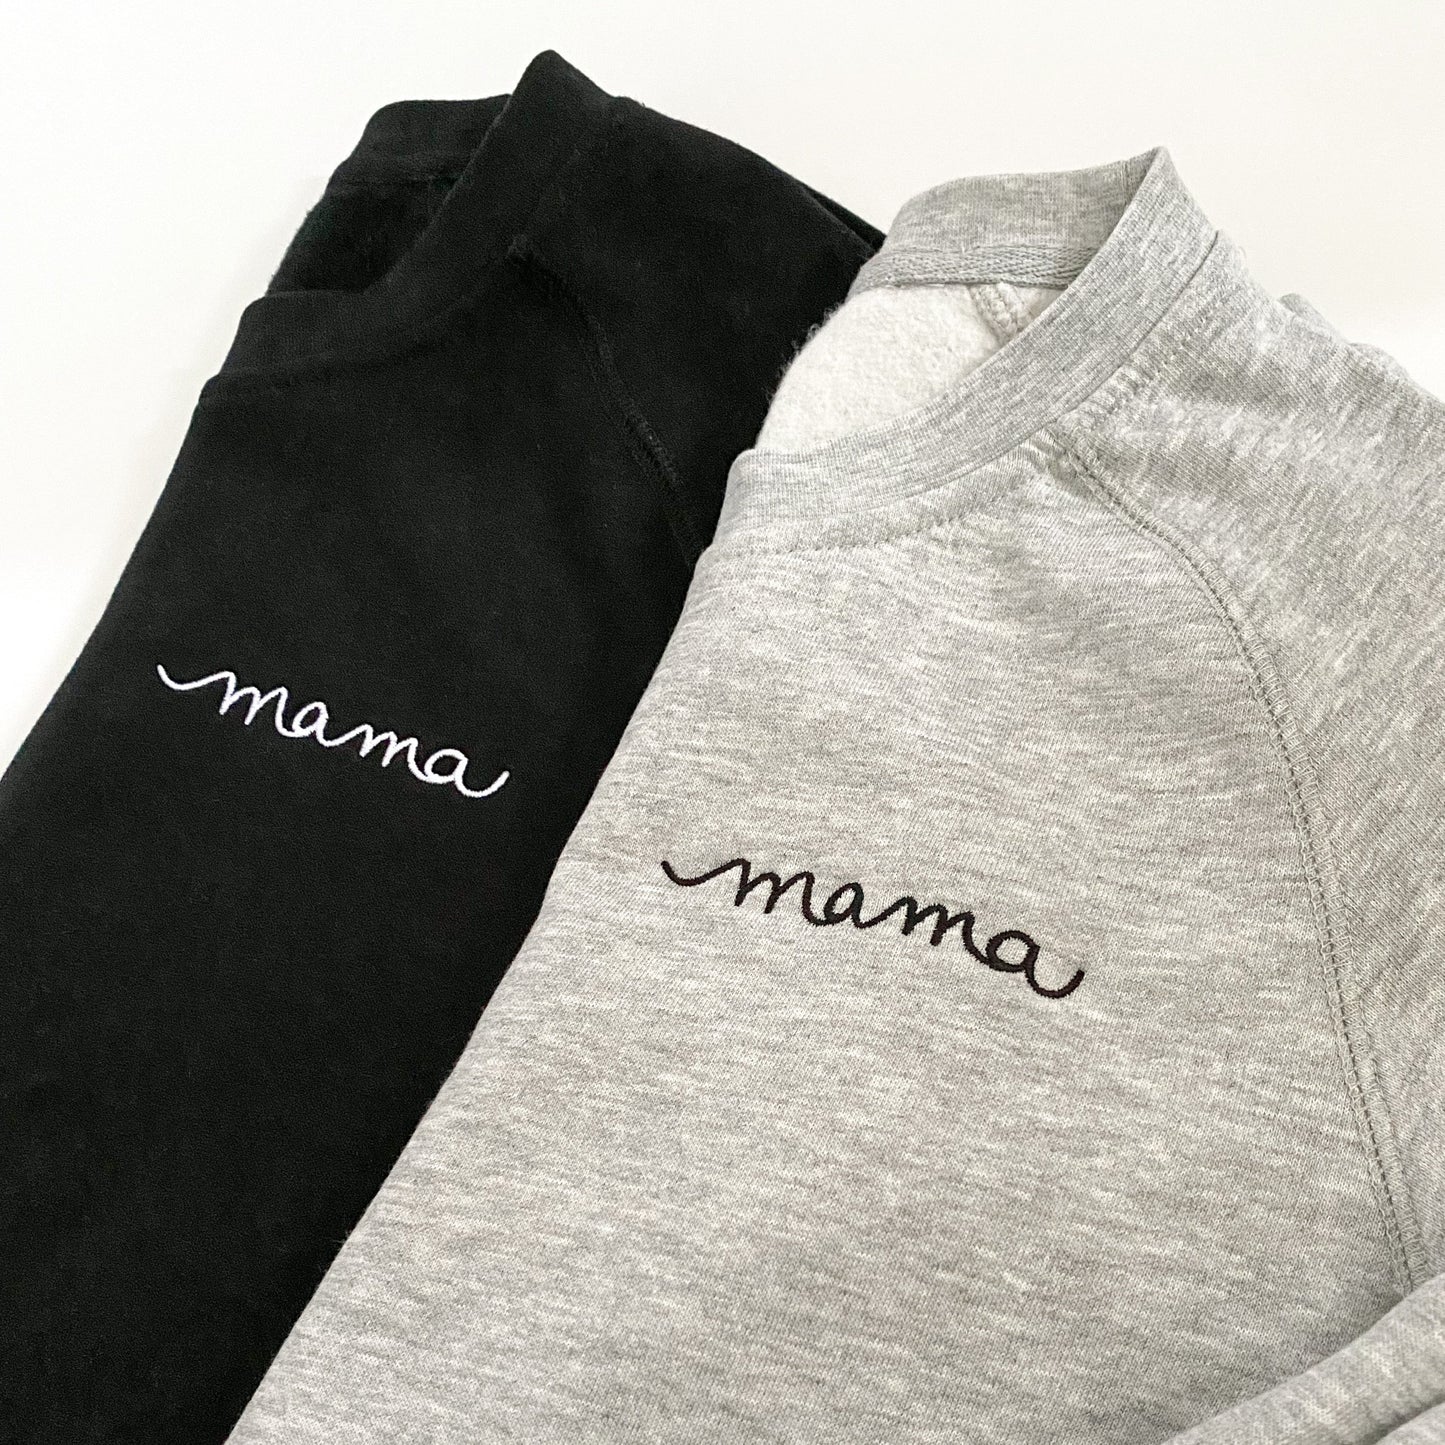 Mama Embroidered Crewneck Sweater | 2 Colour Options